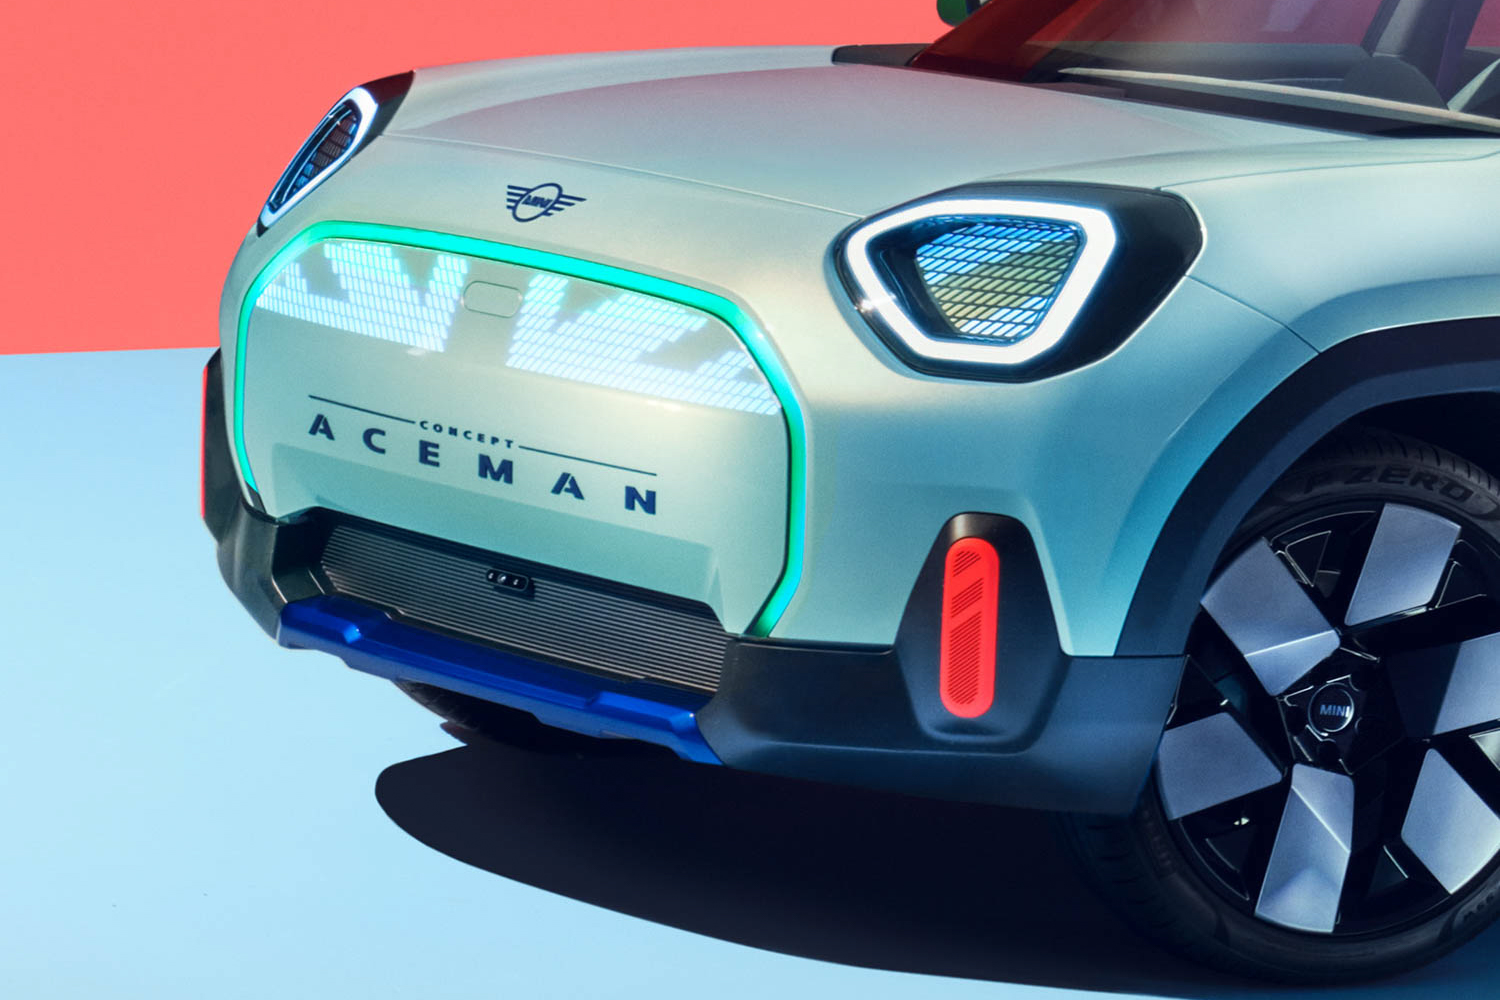 MINI Aceman concept previews new electric crossover